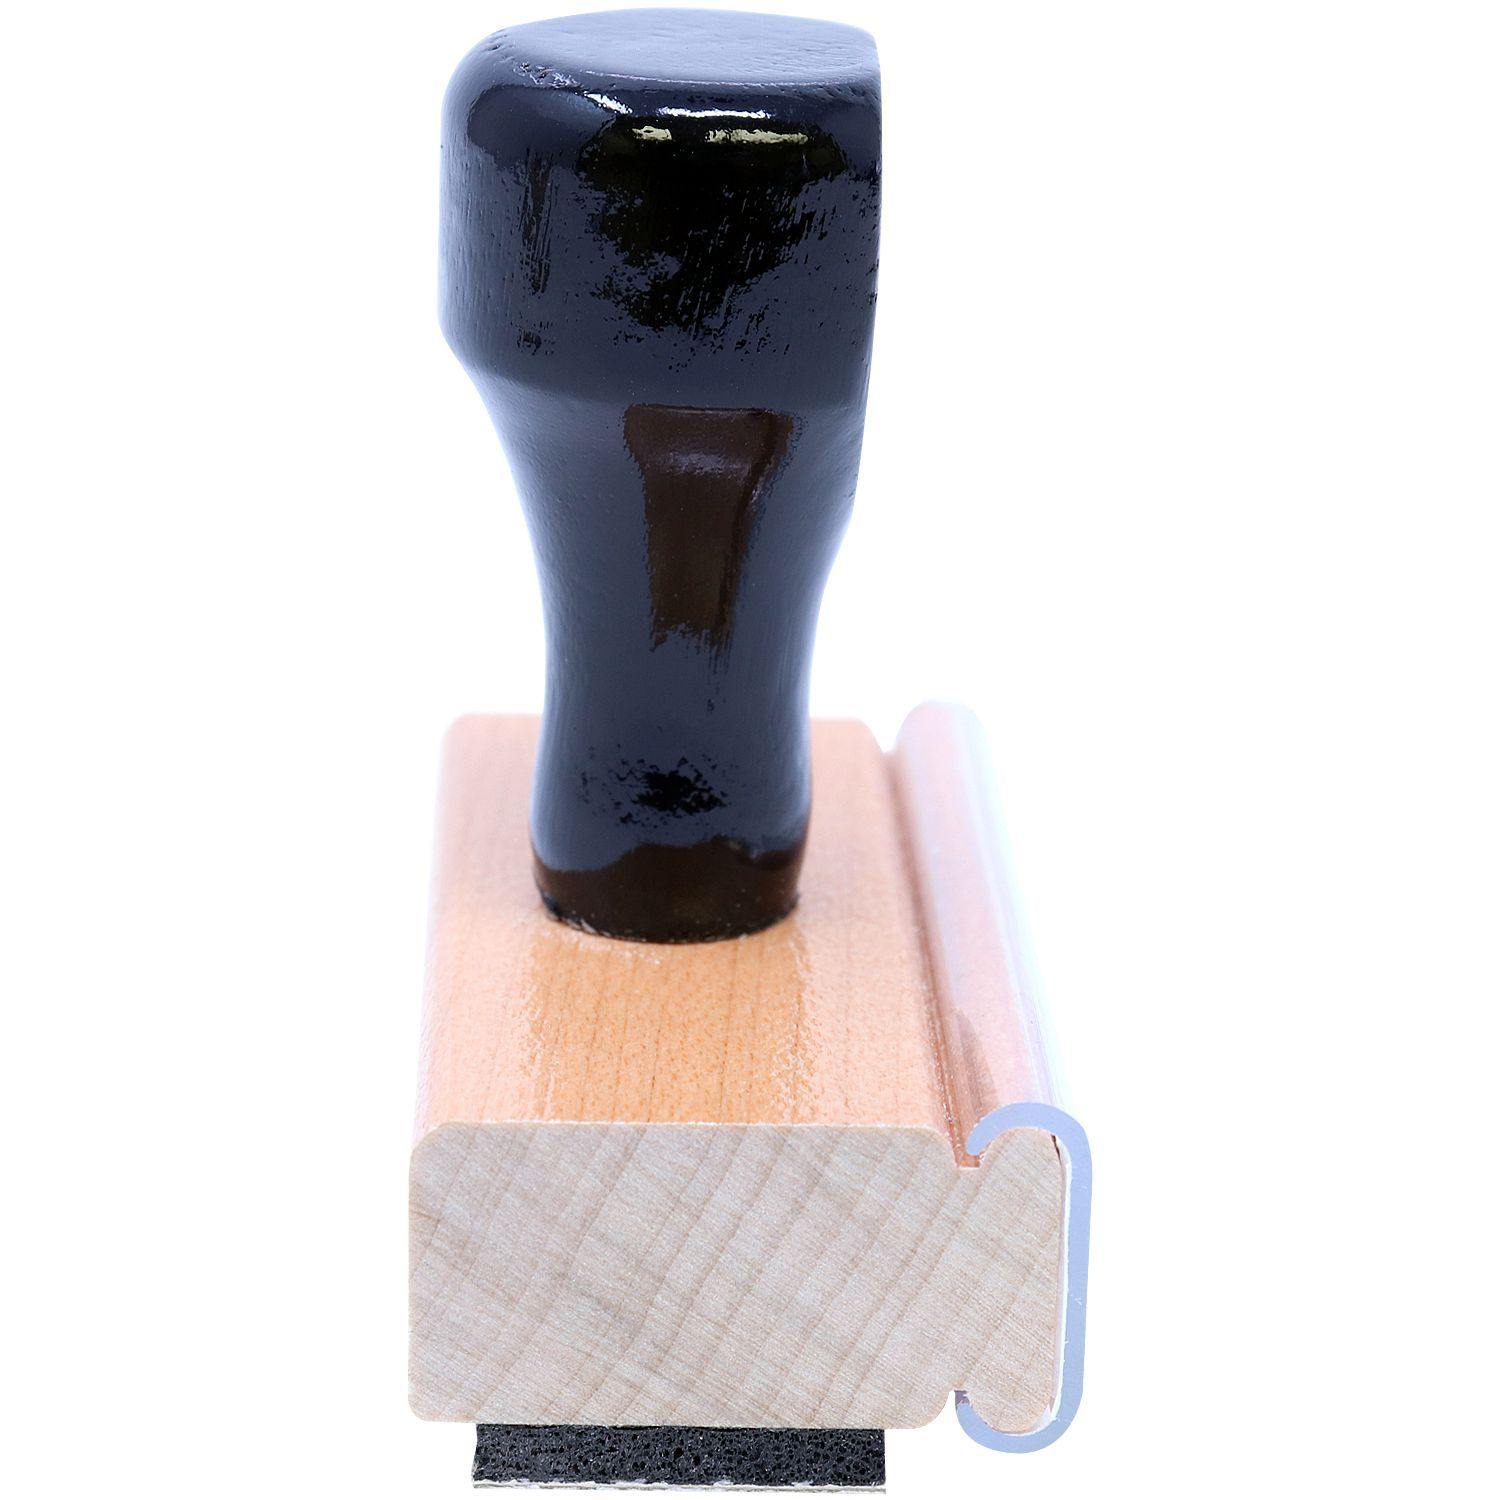 Paid with Box Rubber Stamp - Engineer Seal Stamps - Brand_Acorn, Impression Size_Small, Stamp Type_Regular Stamp, Type of Use_Business, Type of Use_Finance, Type of Use_General